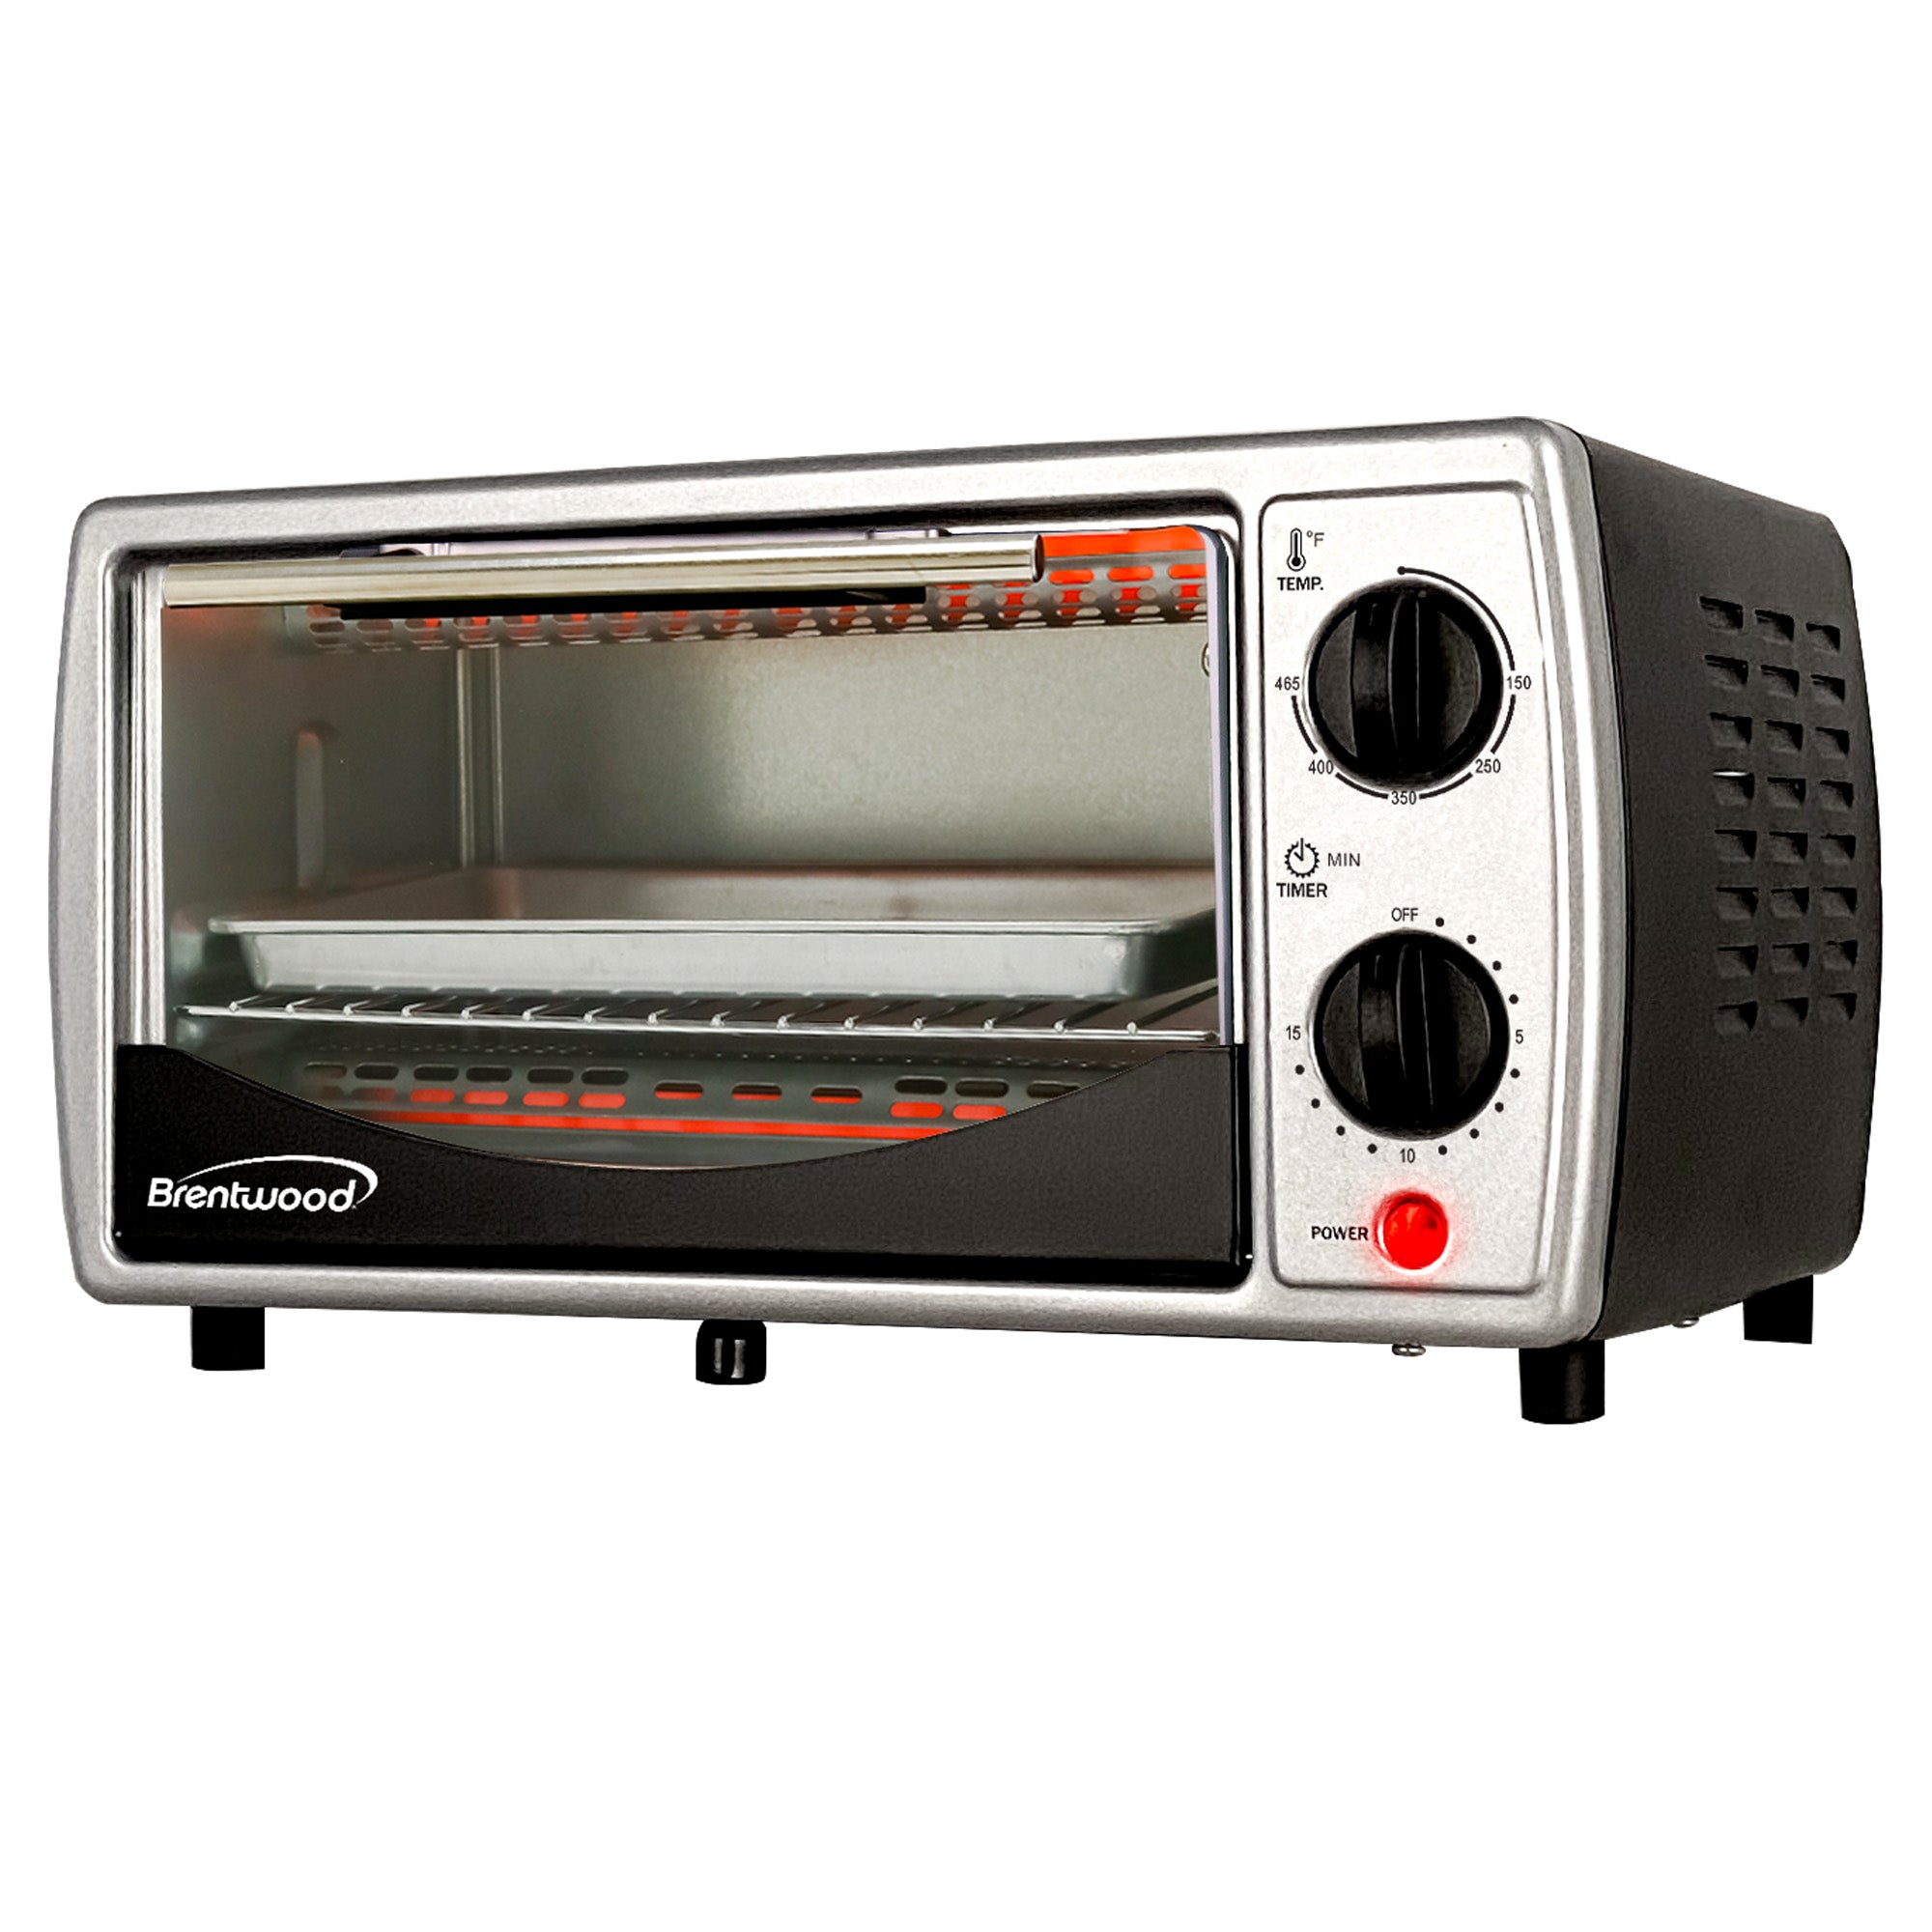 Brentwood Appliances TS-345R 4-Slice Toaster Oven, Red